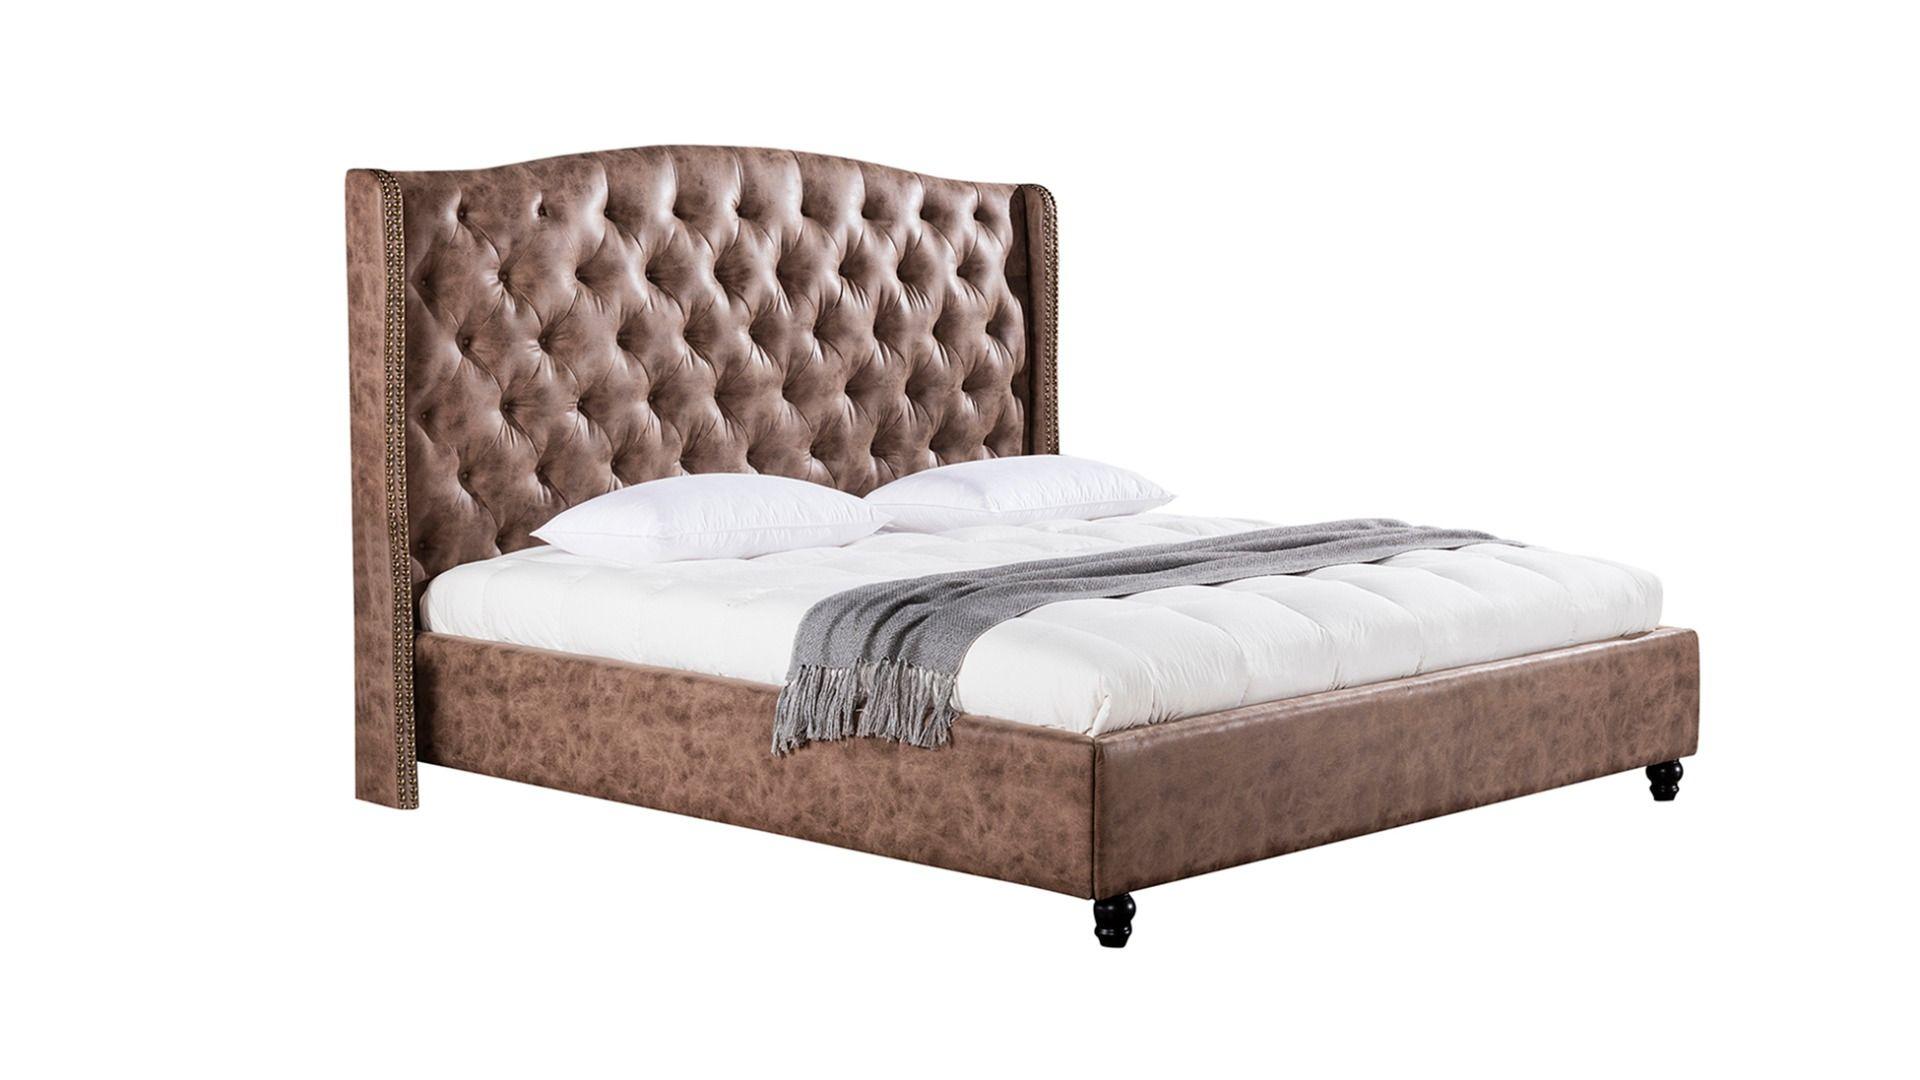 Contemporary Platform Bed B-D062-BRO AE B-D062-BRO-Q in Brown Leather Air Fabric